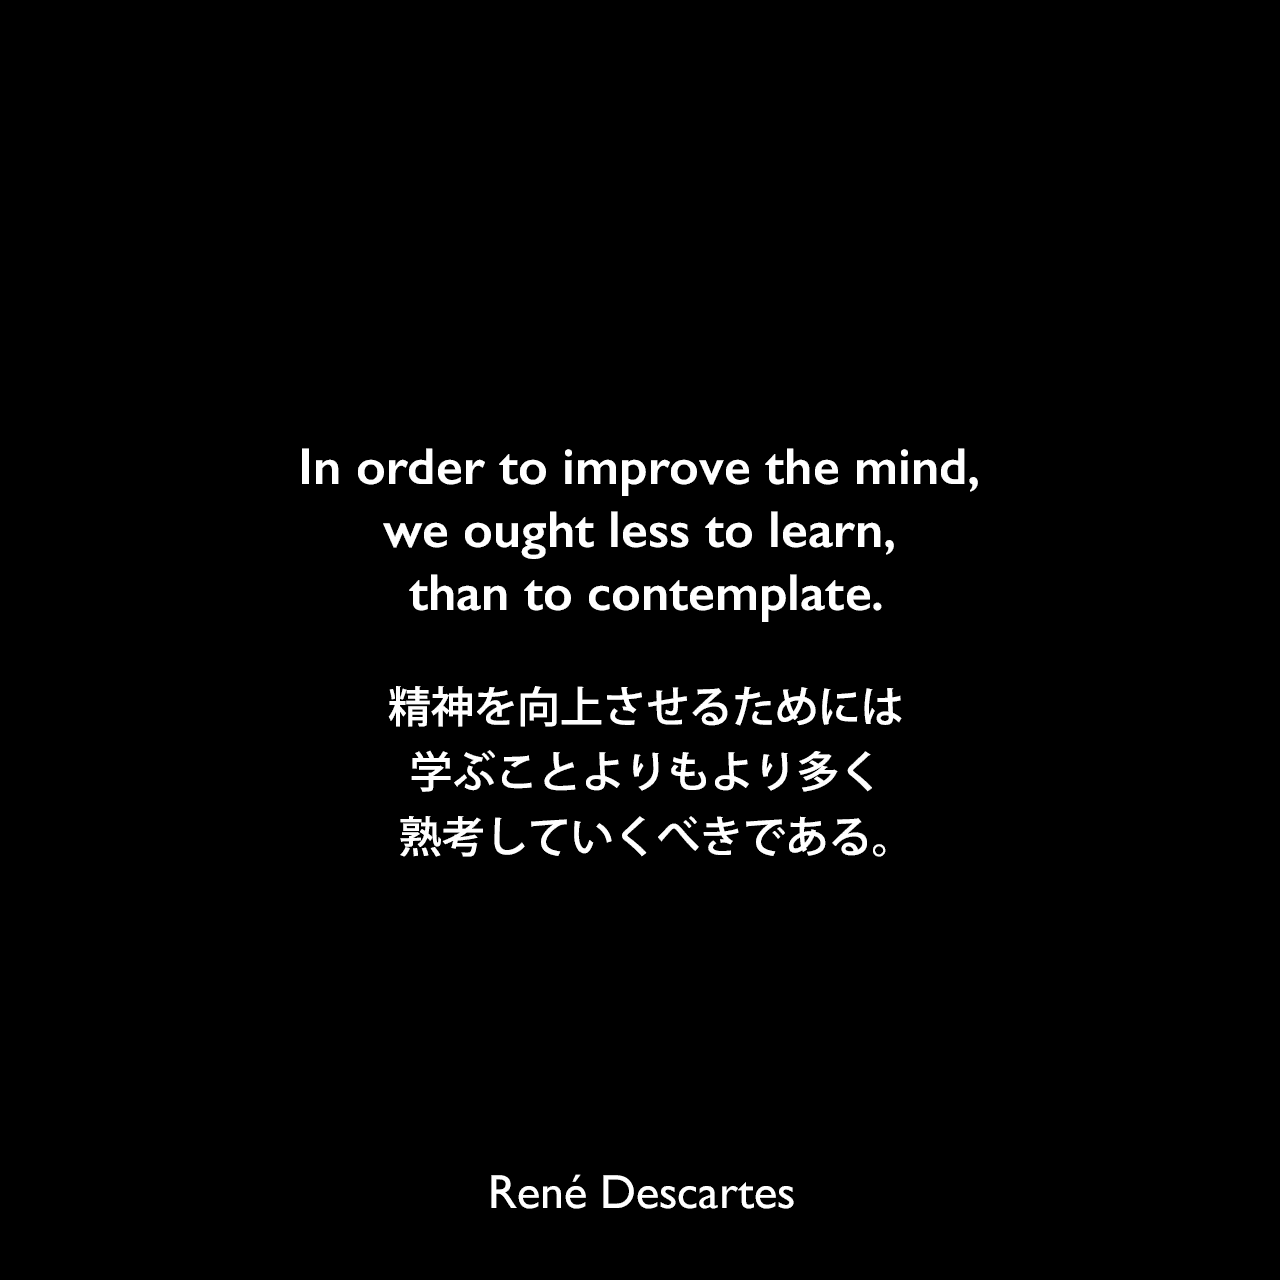 In order to improve the mind, we ought less to learn, than to contemplate.精神を向上させるためには、学ぶことよりもより多く熟考していくべきである。René Descartes